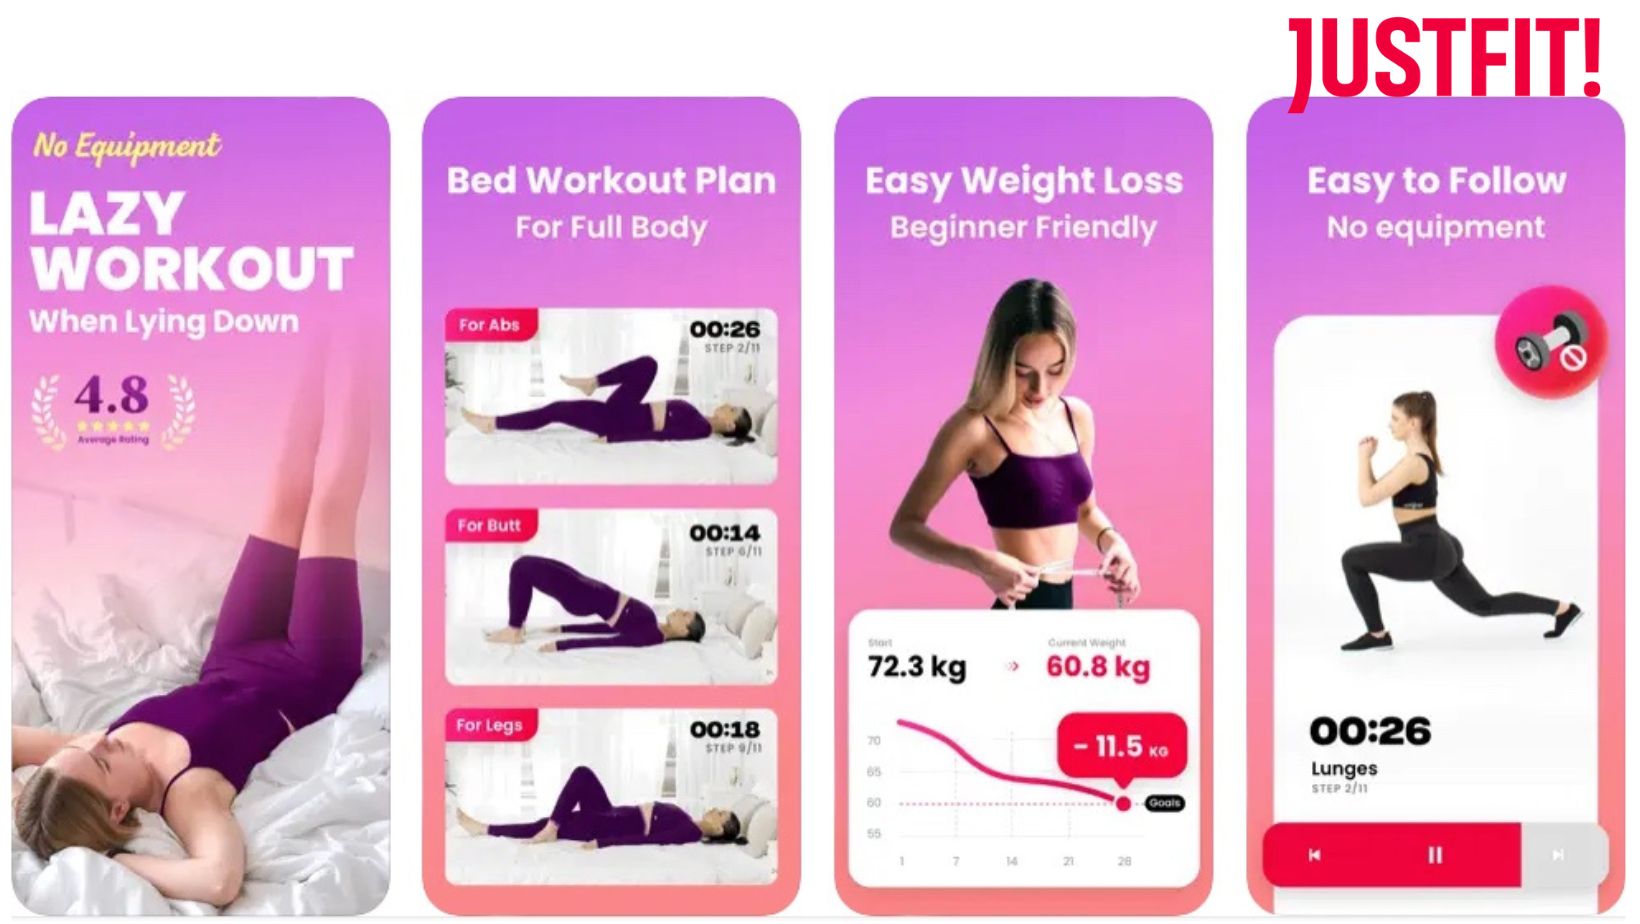 Download justfit app fitness for weight loss